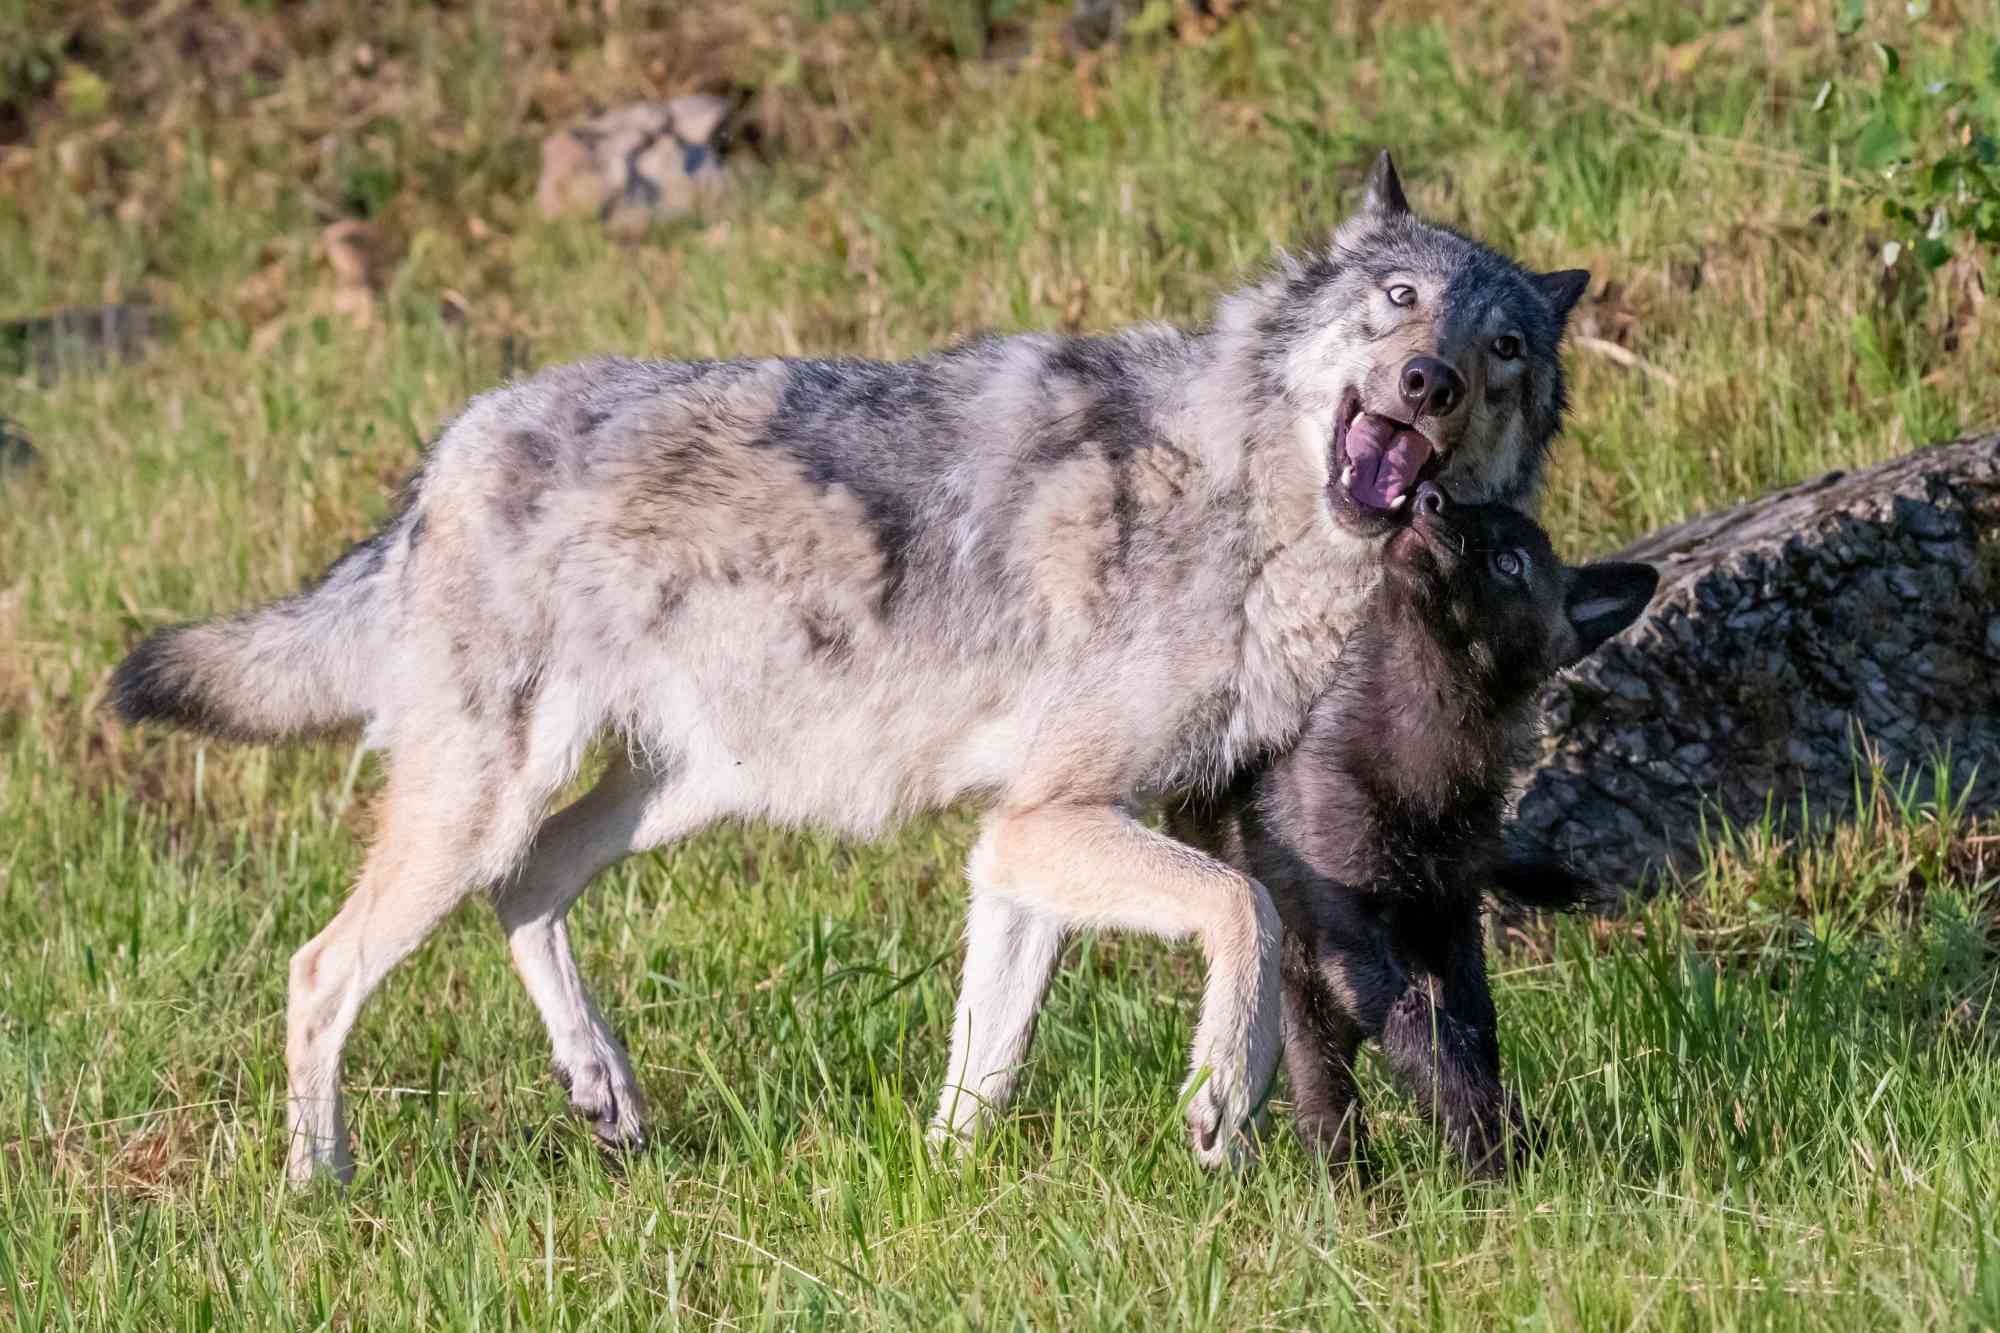 2021.02.07 - Young Wolf Pup Playing with Mom - Kara Capaldo - iStockphoto